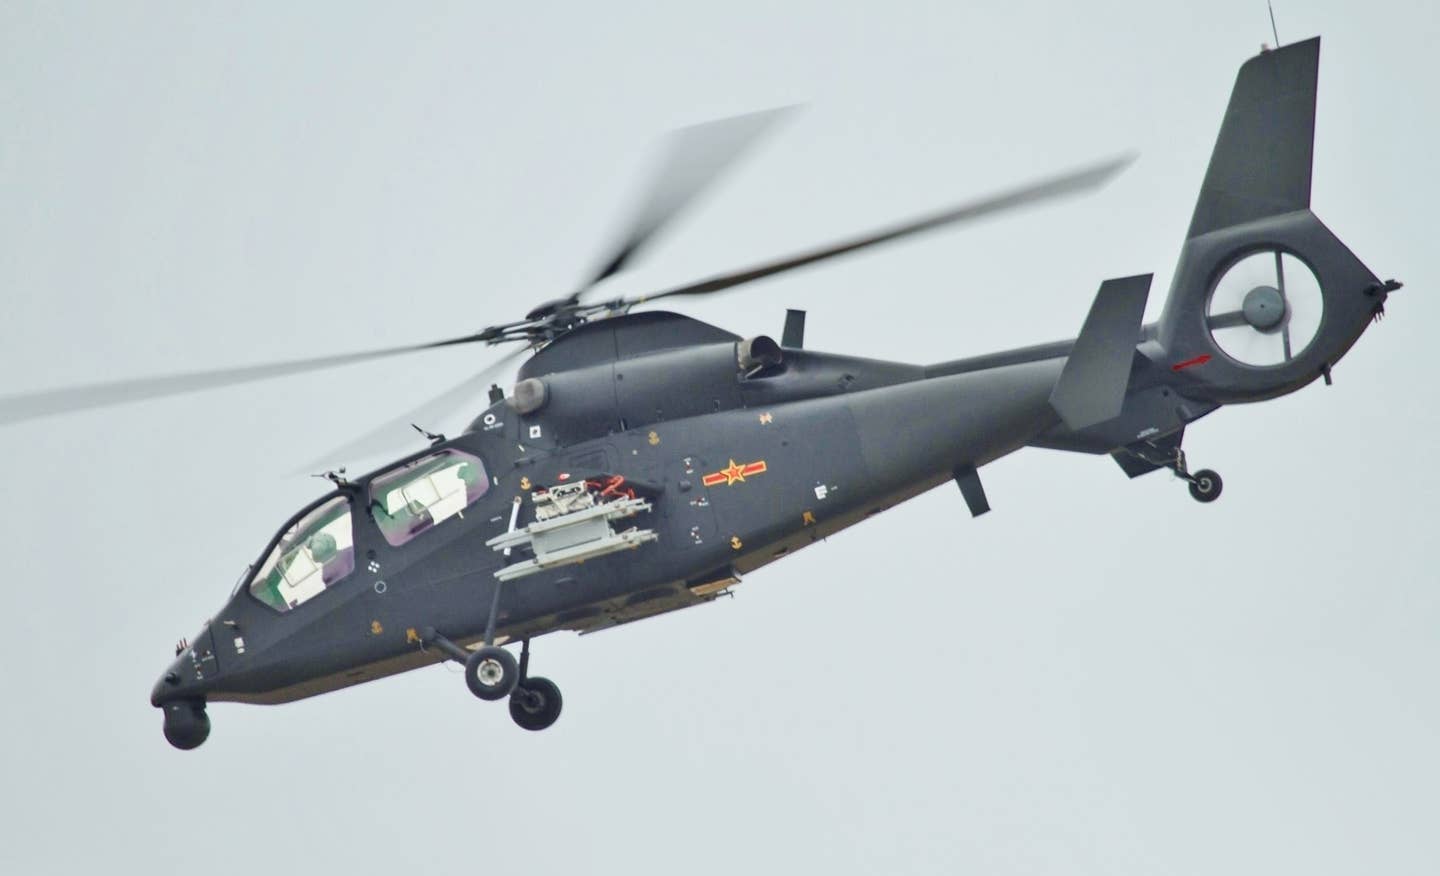 A Z-19 scout/attack helicopter making a low-level pass at the Zhuhai Airshow in November 2012. <em>Alert5/Wikimedia Commons</em>